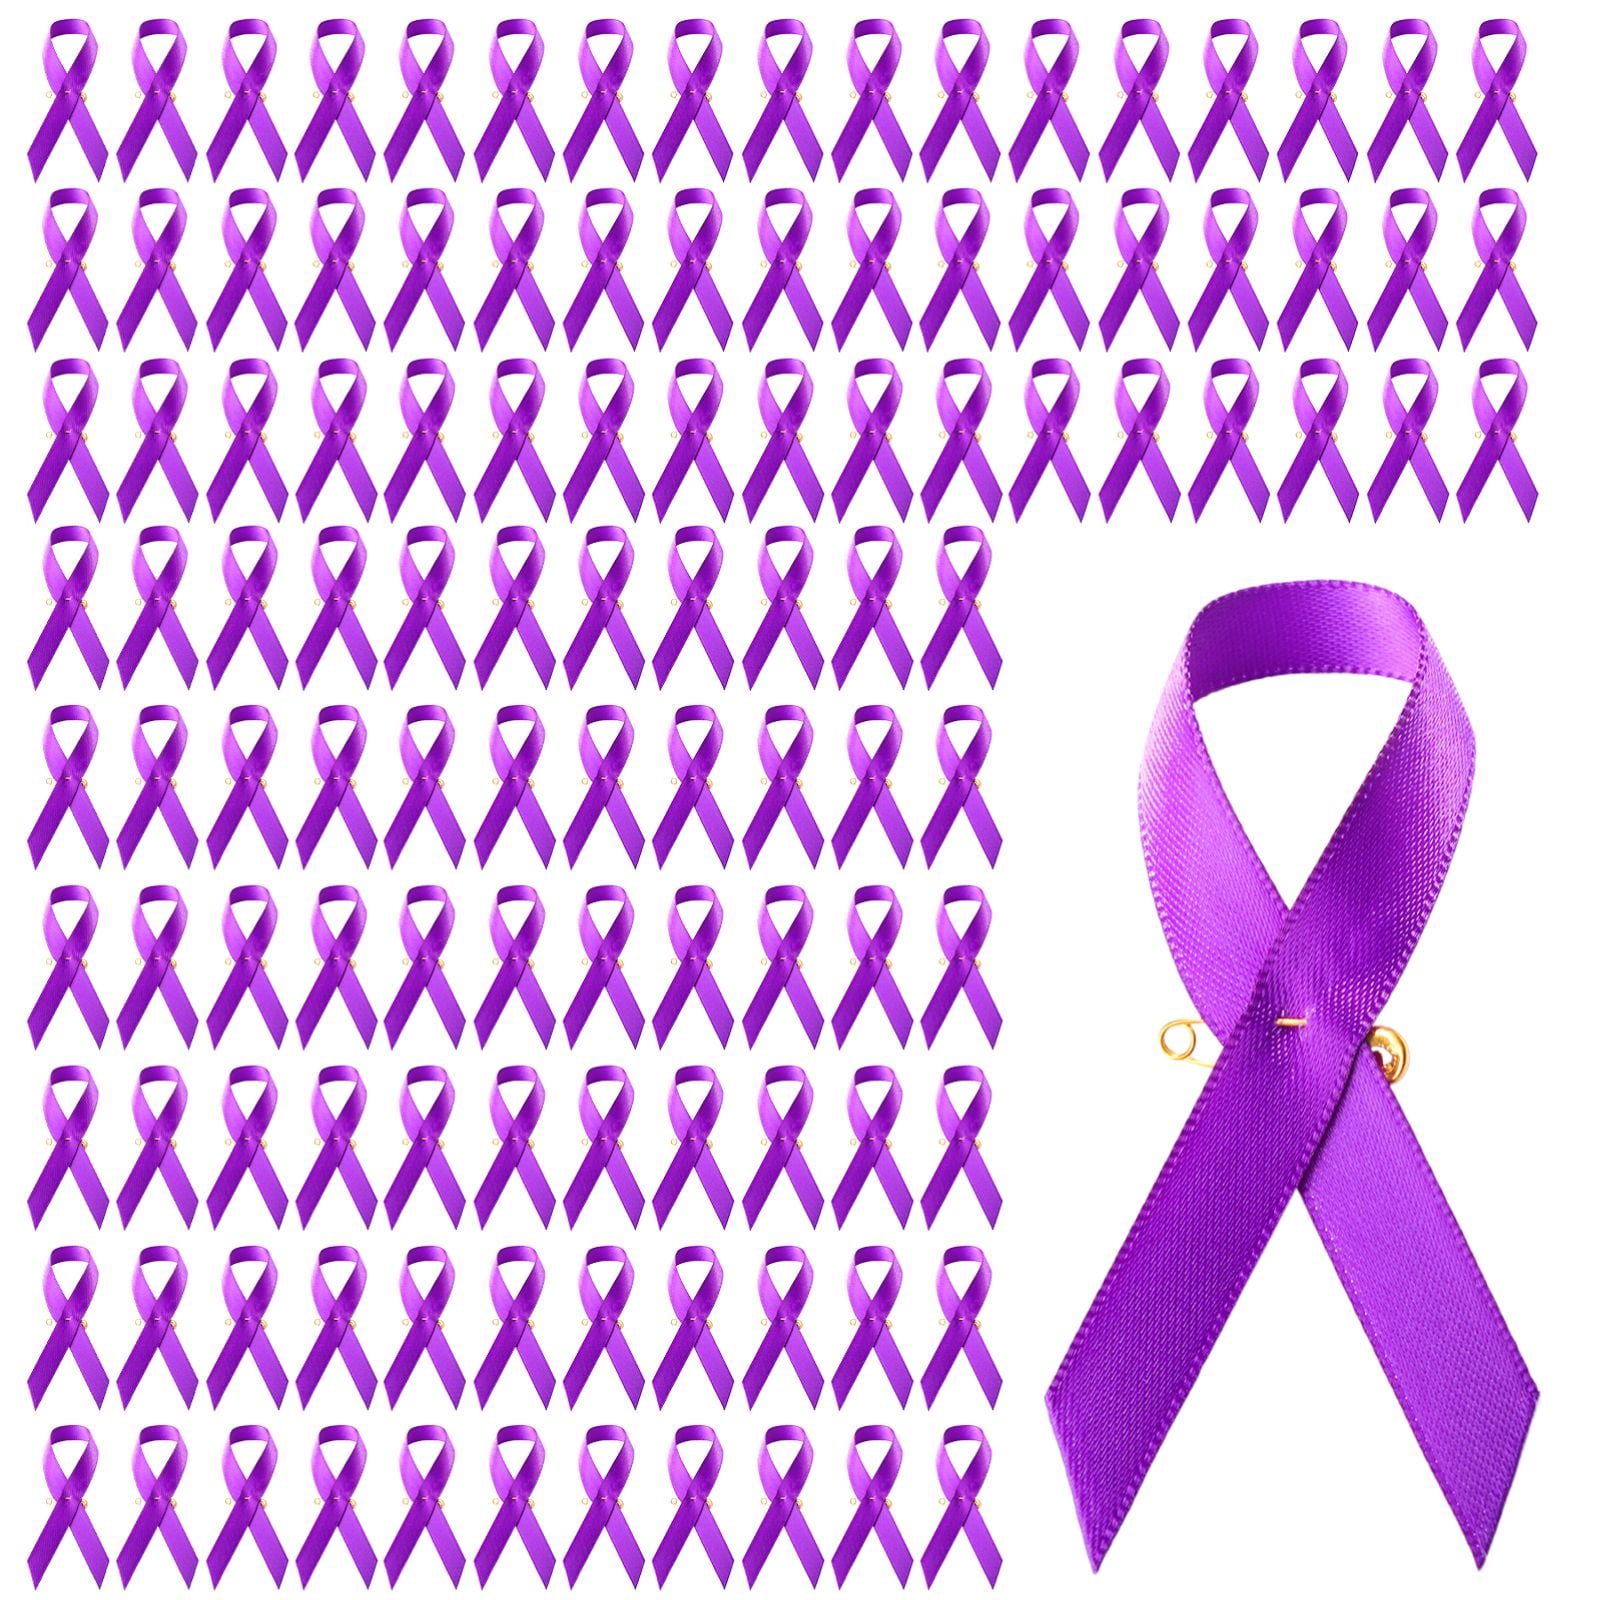 Suicide Awareness Ribbon Stickers for Sale  Redbubble